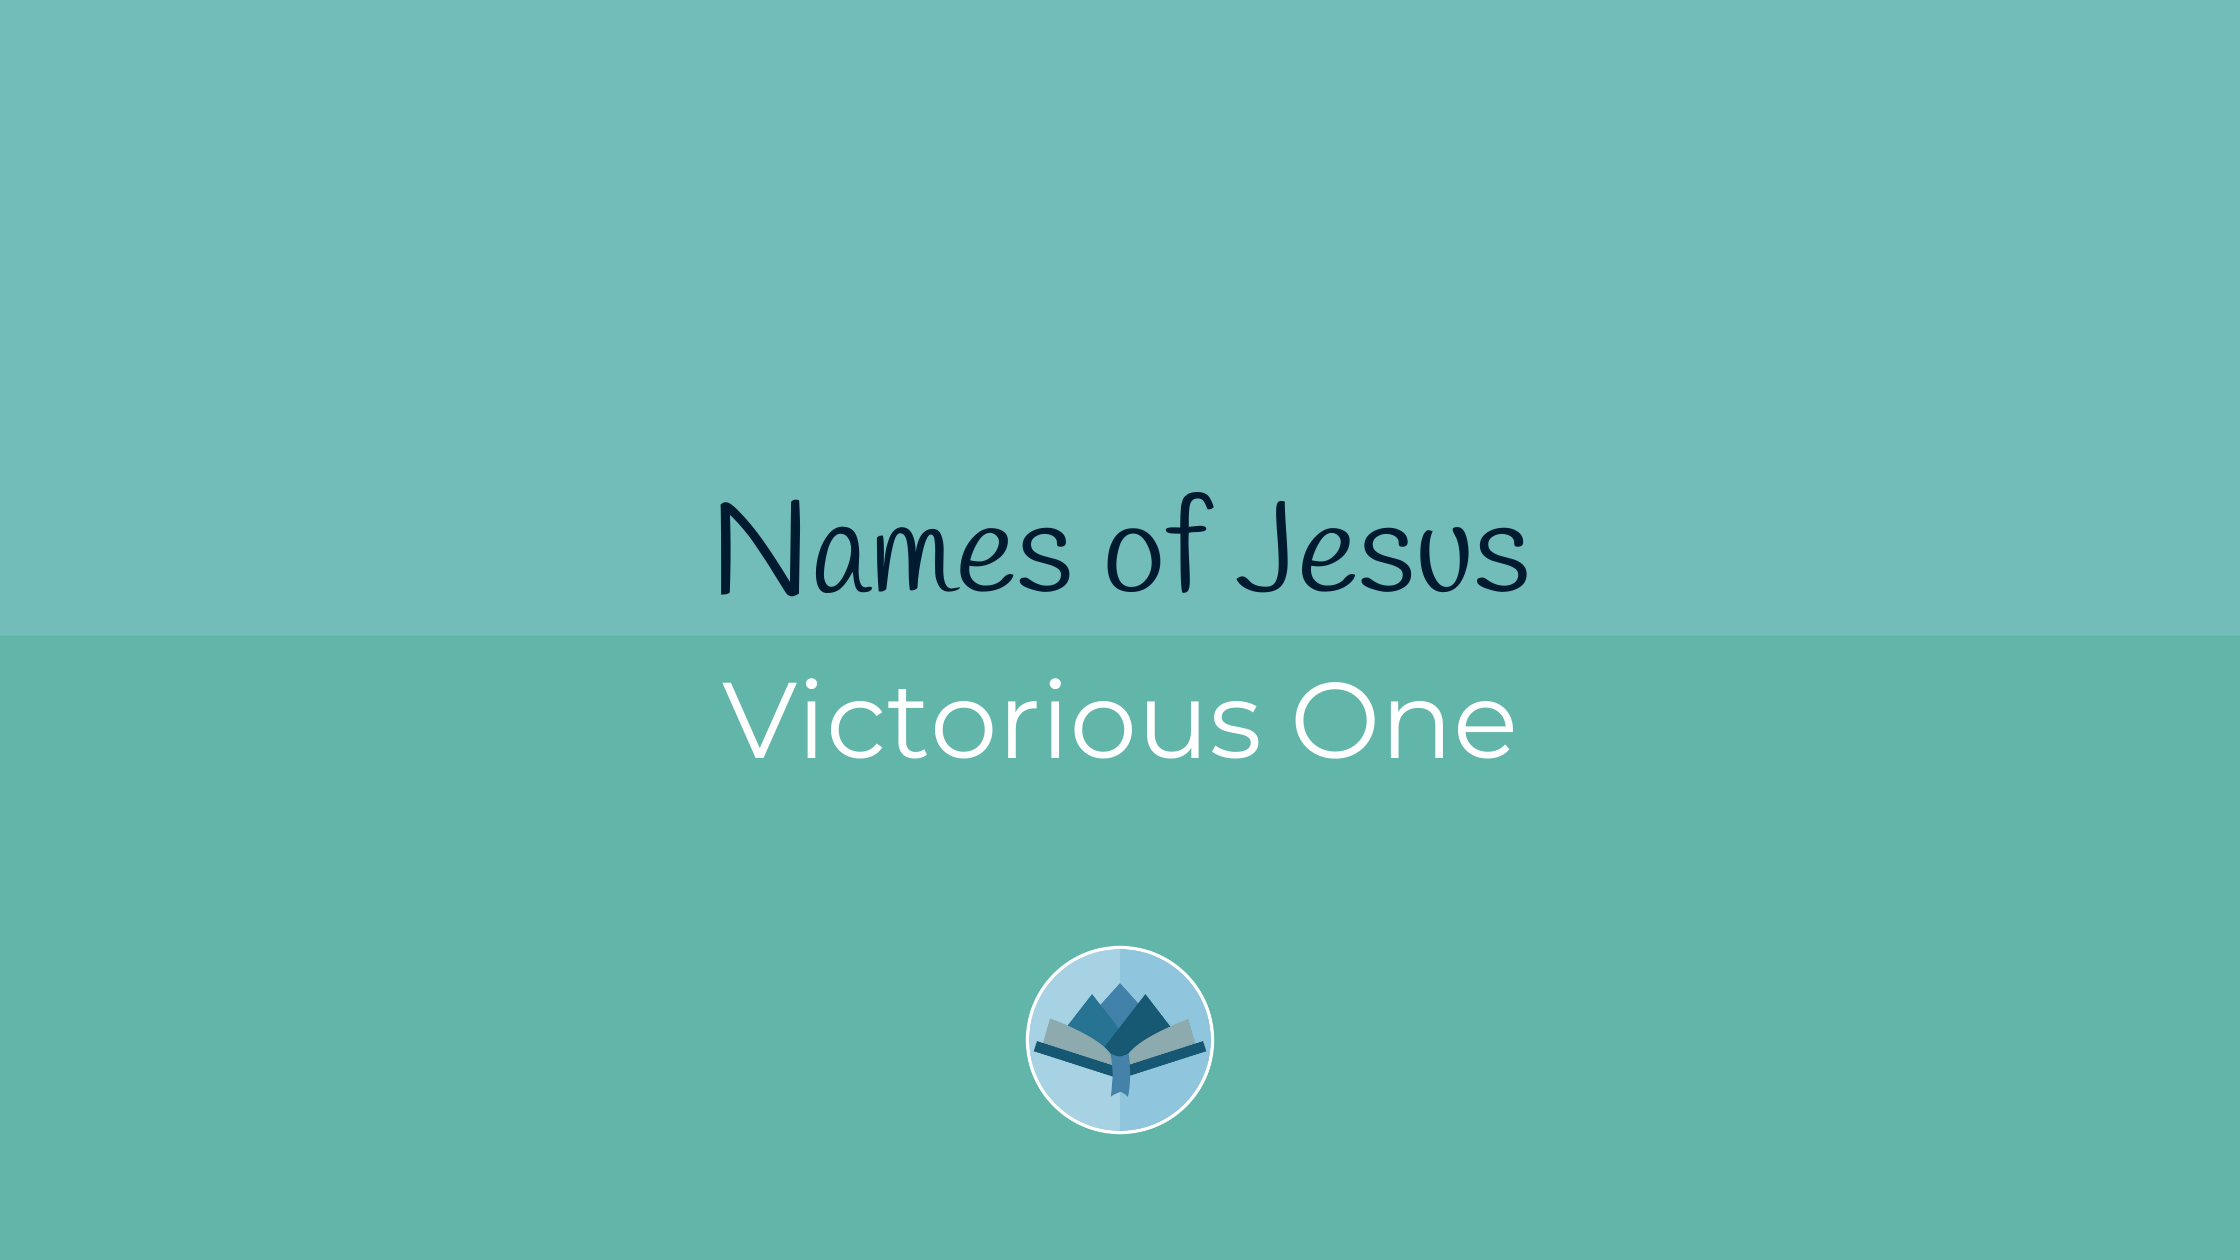 Names of Jesus Victorious One